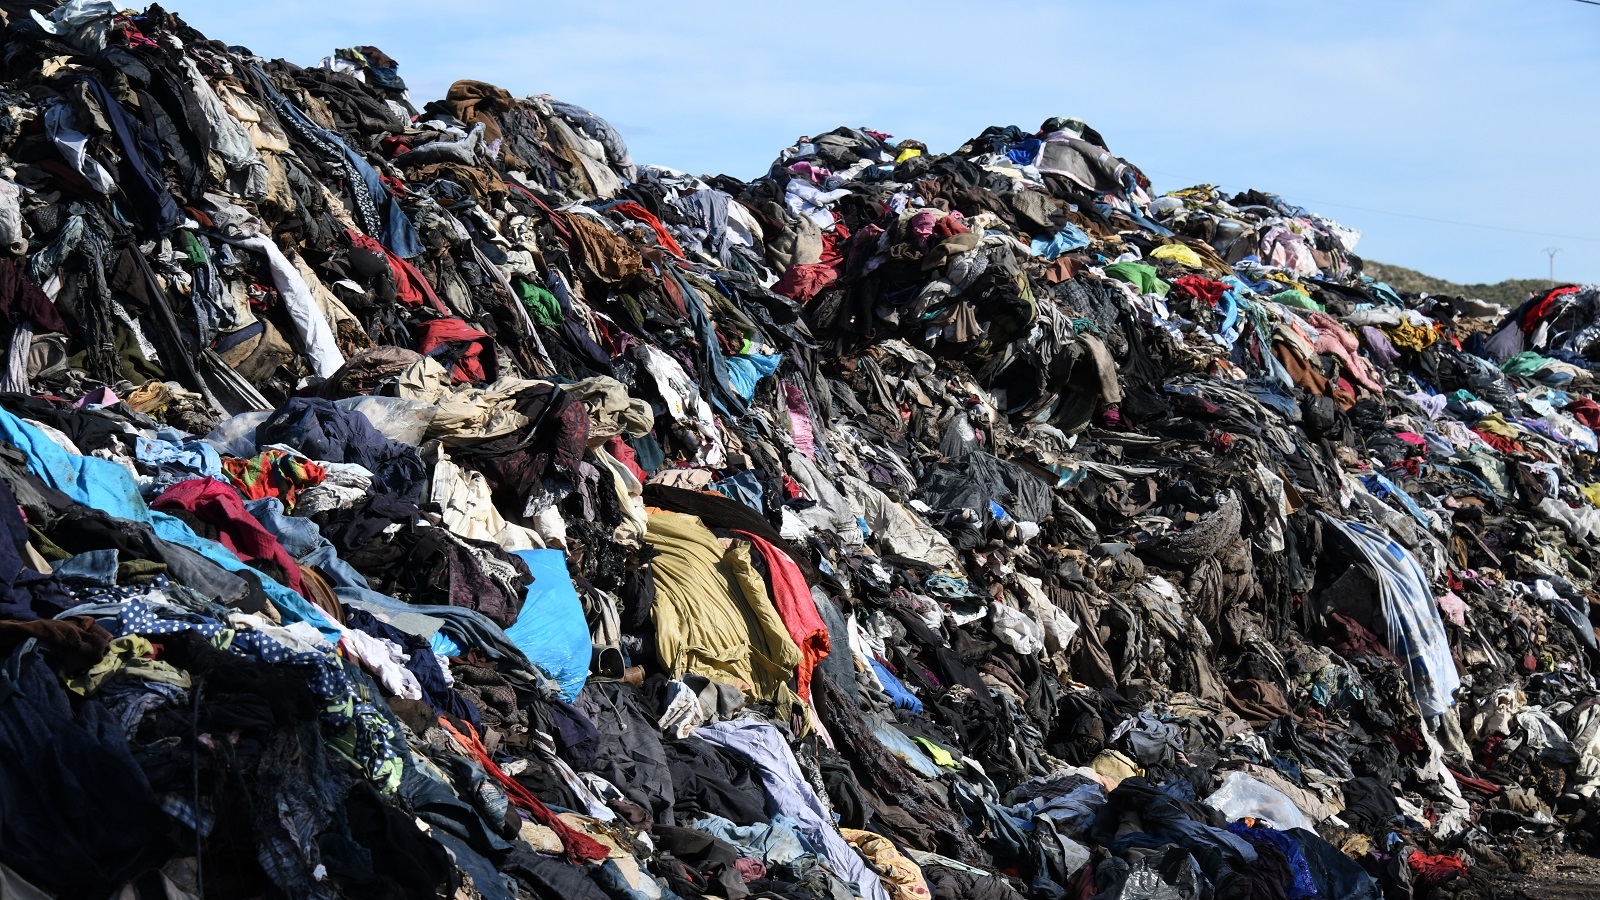 Pile of discarded clothing